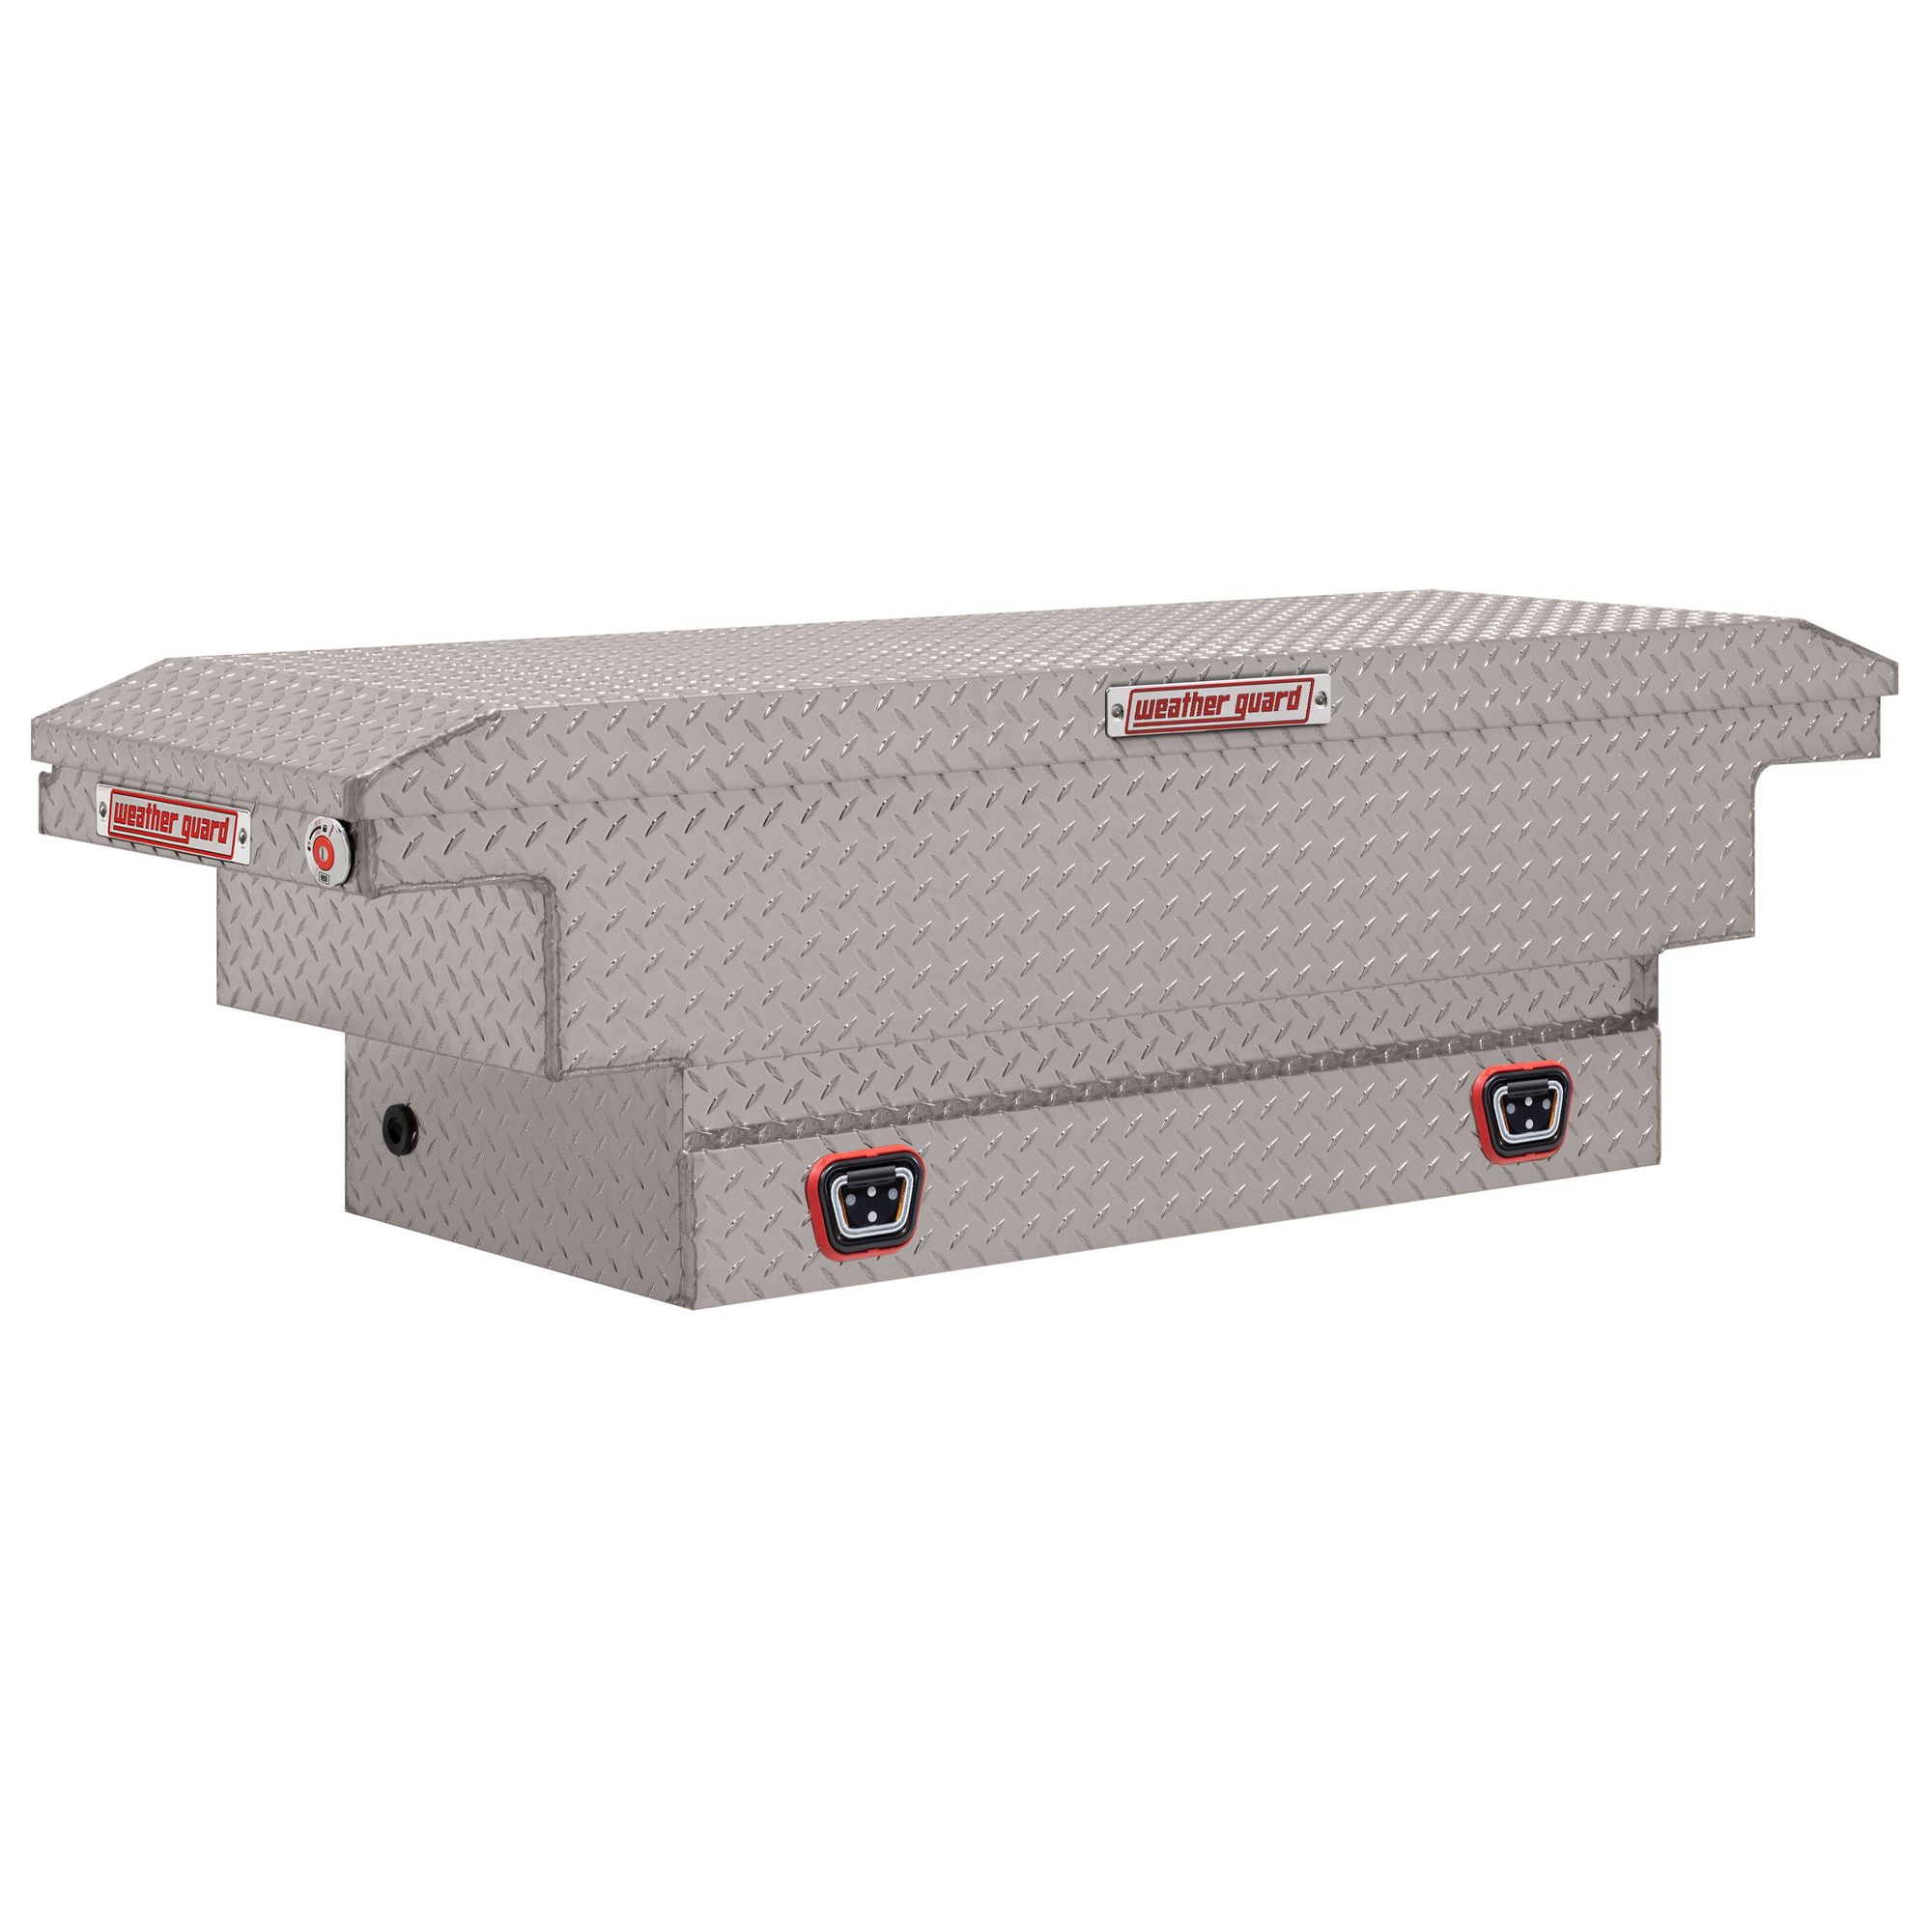 Weather Guard, 62Inch L Saddle Box, Low Profile, Width 62 in, Material Aluminum, Color Finish Diamond Plate Silver, Model 131-0-04